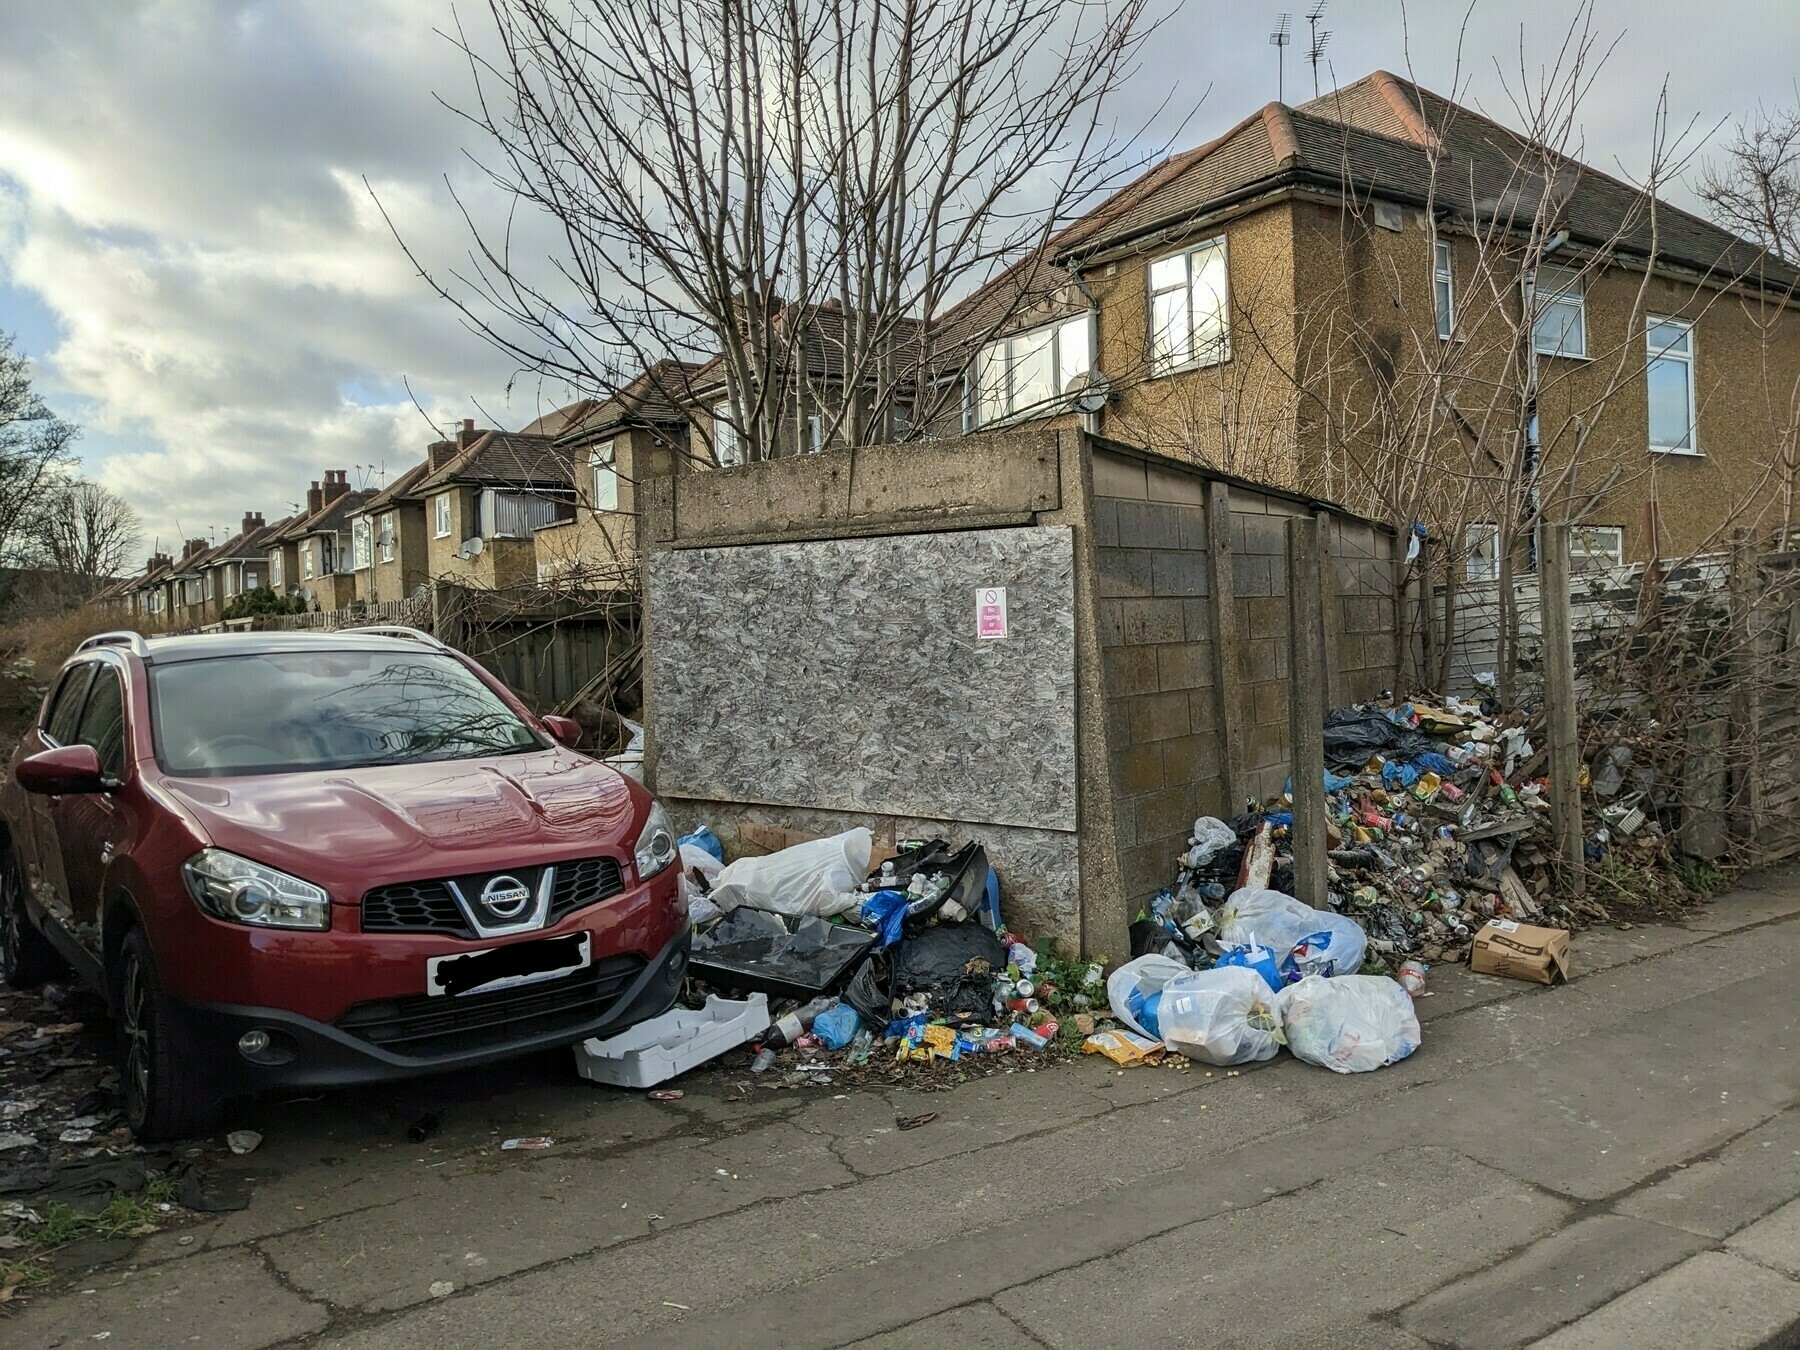 Photo of car parked in alleyway surrounded by fly-tipped and dumped rubbish. Faded sign on the wall behind says: NO TIPPING OR DUMPING